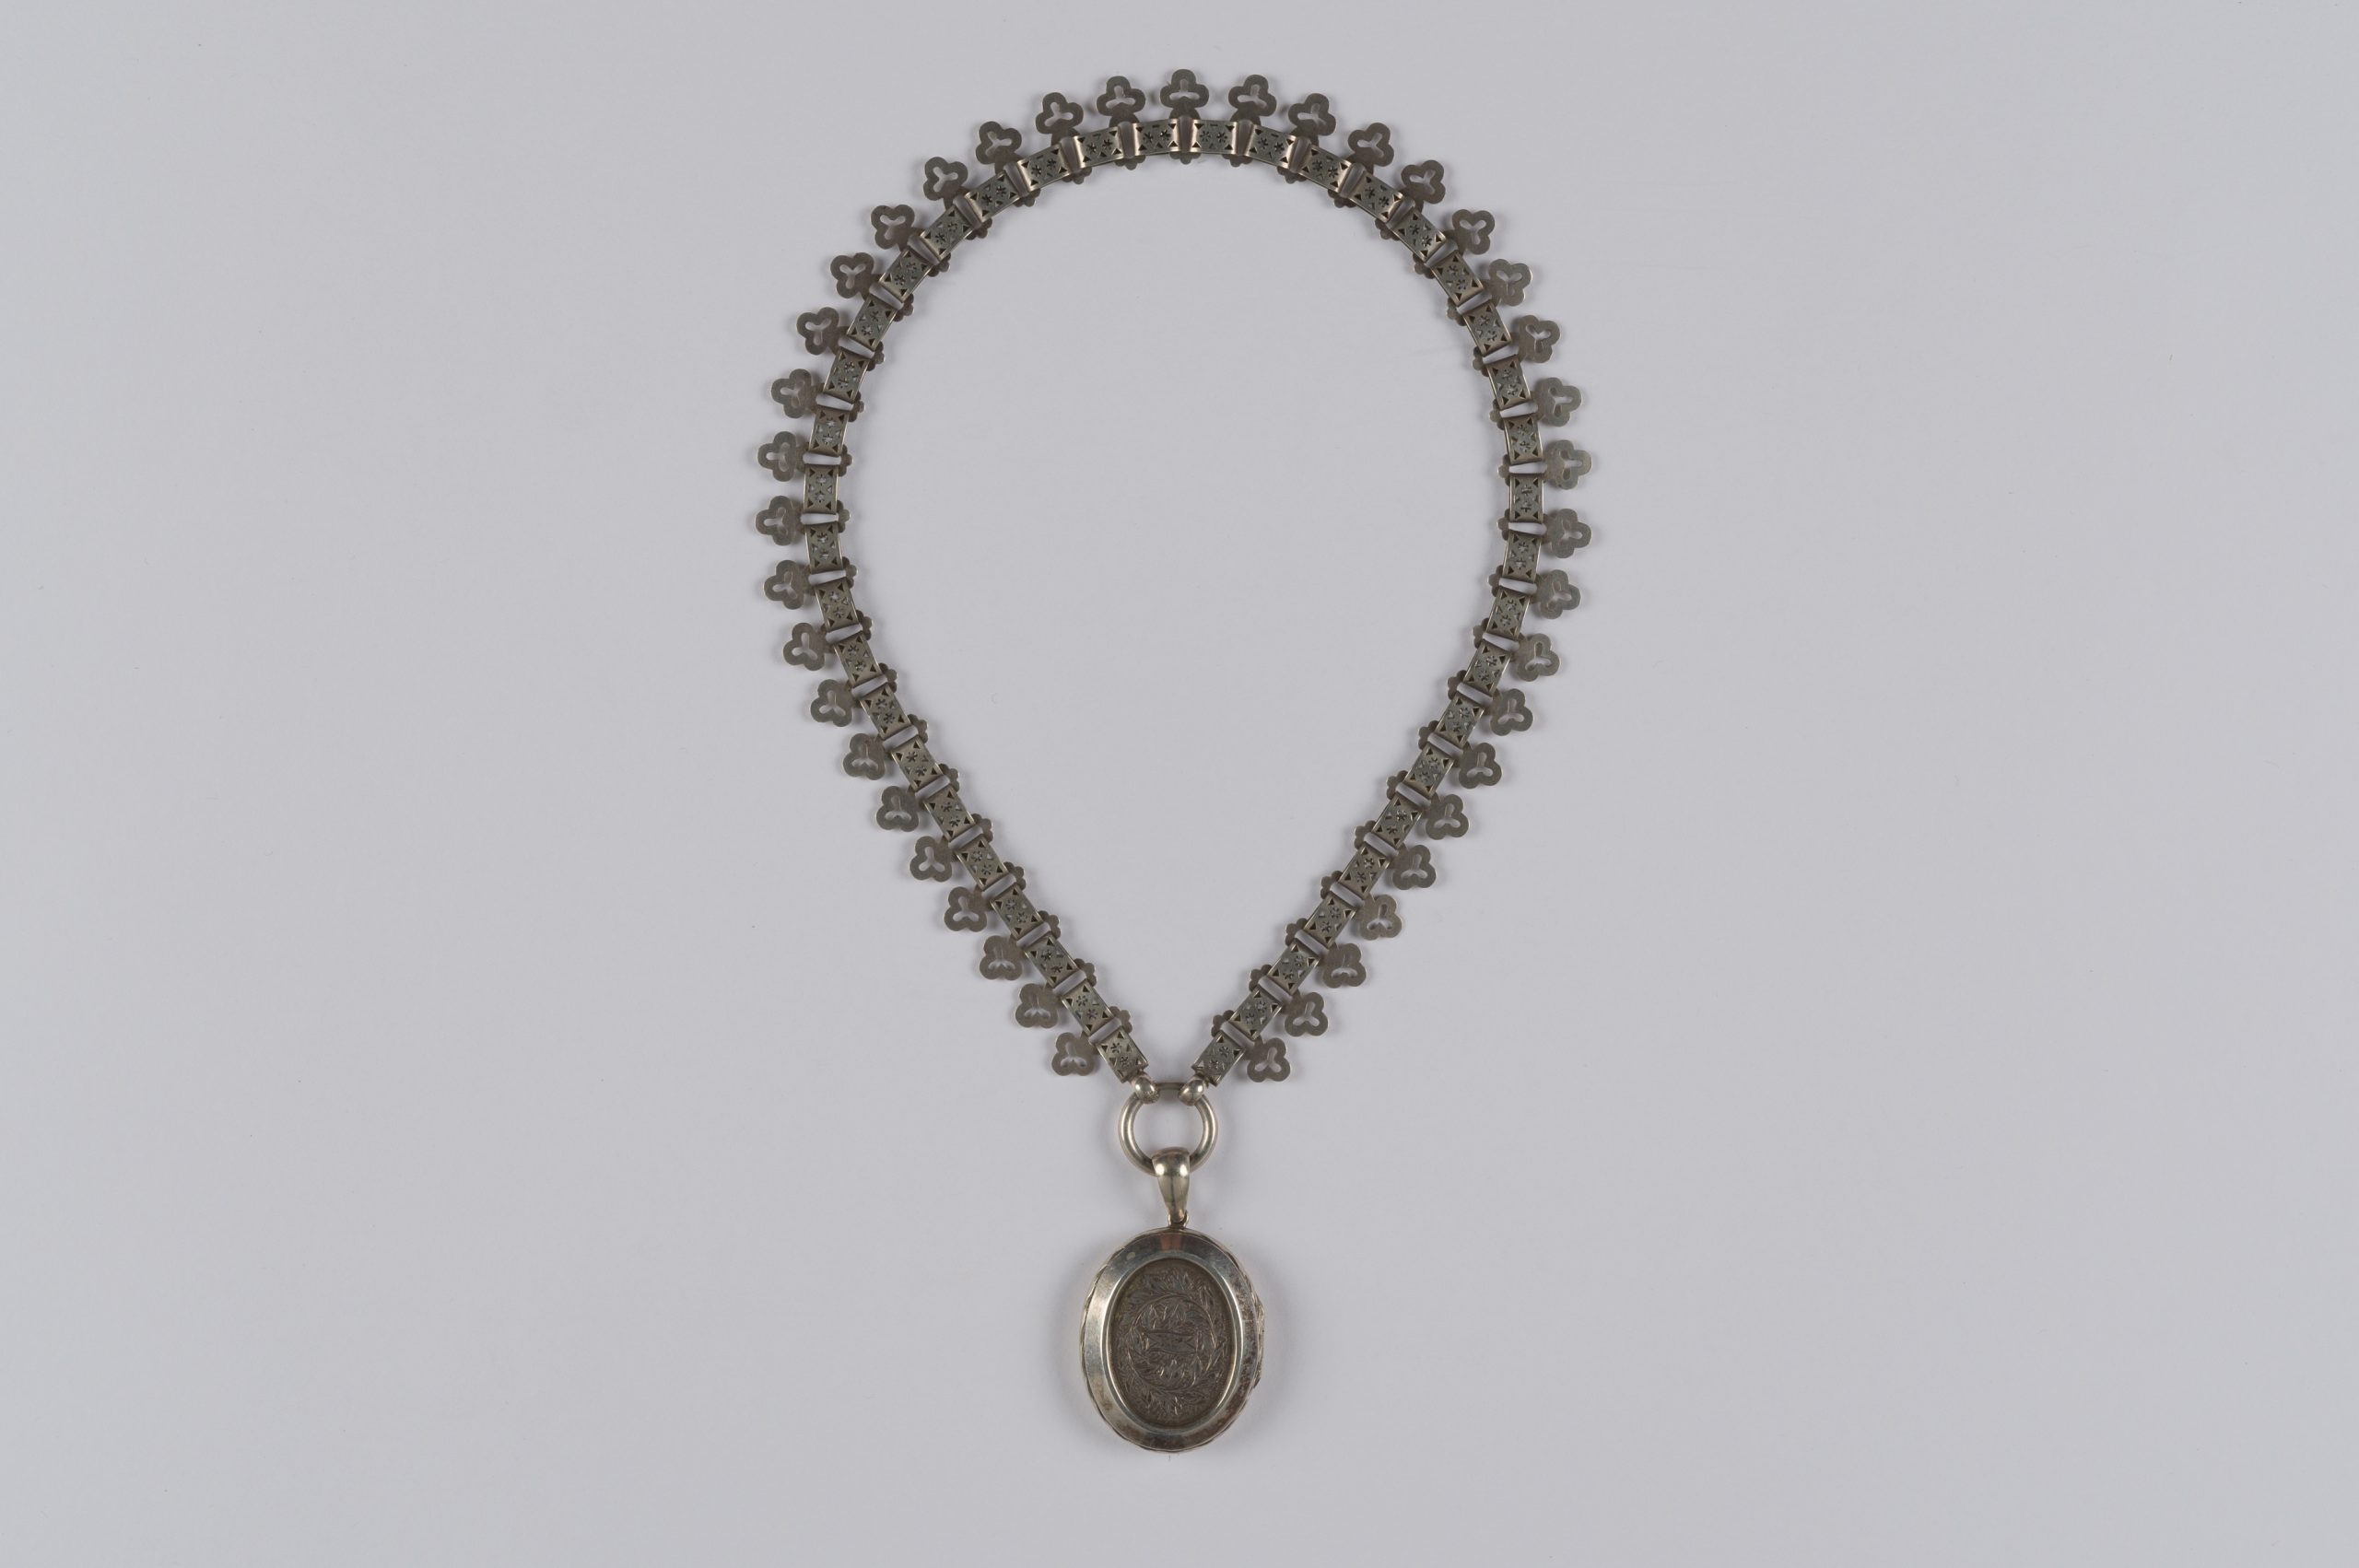 oval locket on a thick chain with clover-leaf design